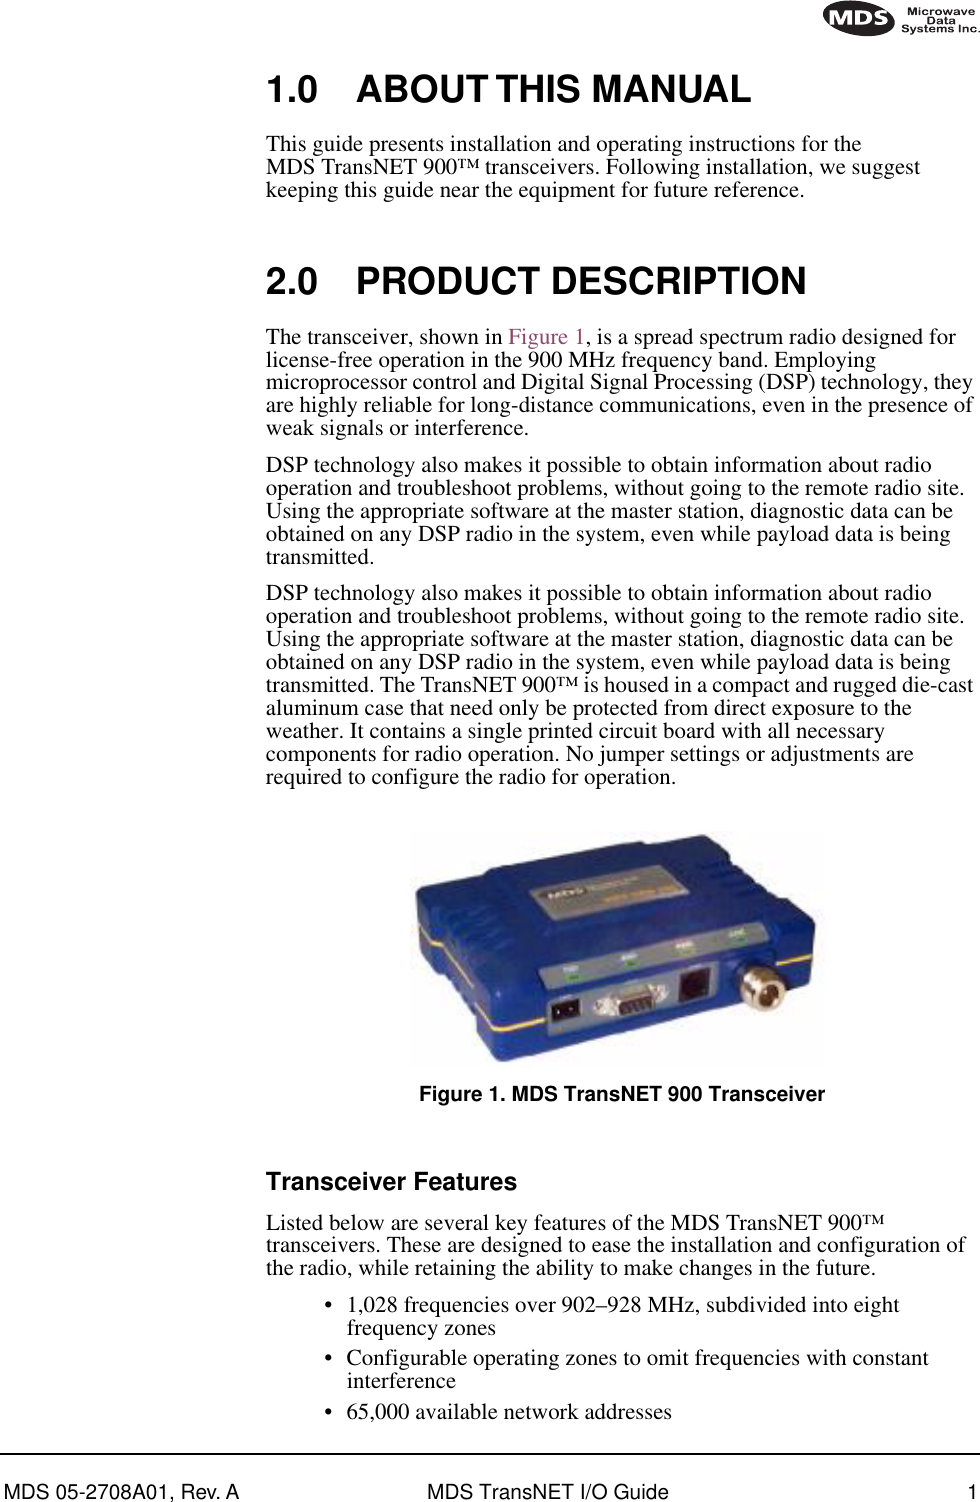  MDS 05-2708A01, Rev. A MDS TransNET I/O Guide 1        1.0 ABOUT THIS MANUAL This guide presents installation and operating instructions for the MDS TransNET 900™   transceivers. Following installation, we suggest keeping this guide near the equipment for future reference. 2.0 PRODUCT DESCRIPTION The transceiver, shown in Figure 1, is a spread spectrum radio designed for license-free operation in the 900 MHz frequency band. Employing microprocessor control and Digital Signal Processing (DSP) technology, they are highly reliable for long-distance communications, even in the presence of weak signals or interference.DSP technology also makes it possible to obtain information about radio operation and troubleshoot problems, without going to the remote radio site. Using the appropriate software at the master station, diagnostic data can be obtained on any DSP radio in the system, even while payload data is being transmitted.DSP technology also makes it possible to obtain information about radio operation and troubleshoot problems, without going to the remote radio site. Using the appropriate software at the master station, diagnostic data can be obtained on any DSP radio in the system, even while payload data is being transmitted. The TransNET 900™ is housed in a compact and rugged die-cast aluminum case that need only be protected from direct exposure to the weather. It contains a single printed circuit board with all necessary components for radio operation. No jumper settings or adjustments are required to configure the radio for operation. Figure 1. MDS TransNET 900 Transceiver Invisible place holder Transceiver Features Listed below are several key features of the MDS TransNET 900™ transceivers. These are designed to ease the installation and configuration of the radio, while retaining the ability to make changes in the future.• 1,028 frequencies over 902–928 MHz, subdivided into eight frequency zones• Configurable operating zones to omit frequencies with constant interference• 65,000 available network addresses